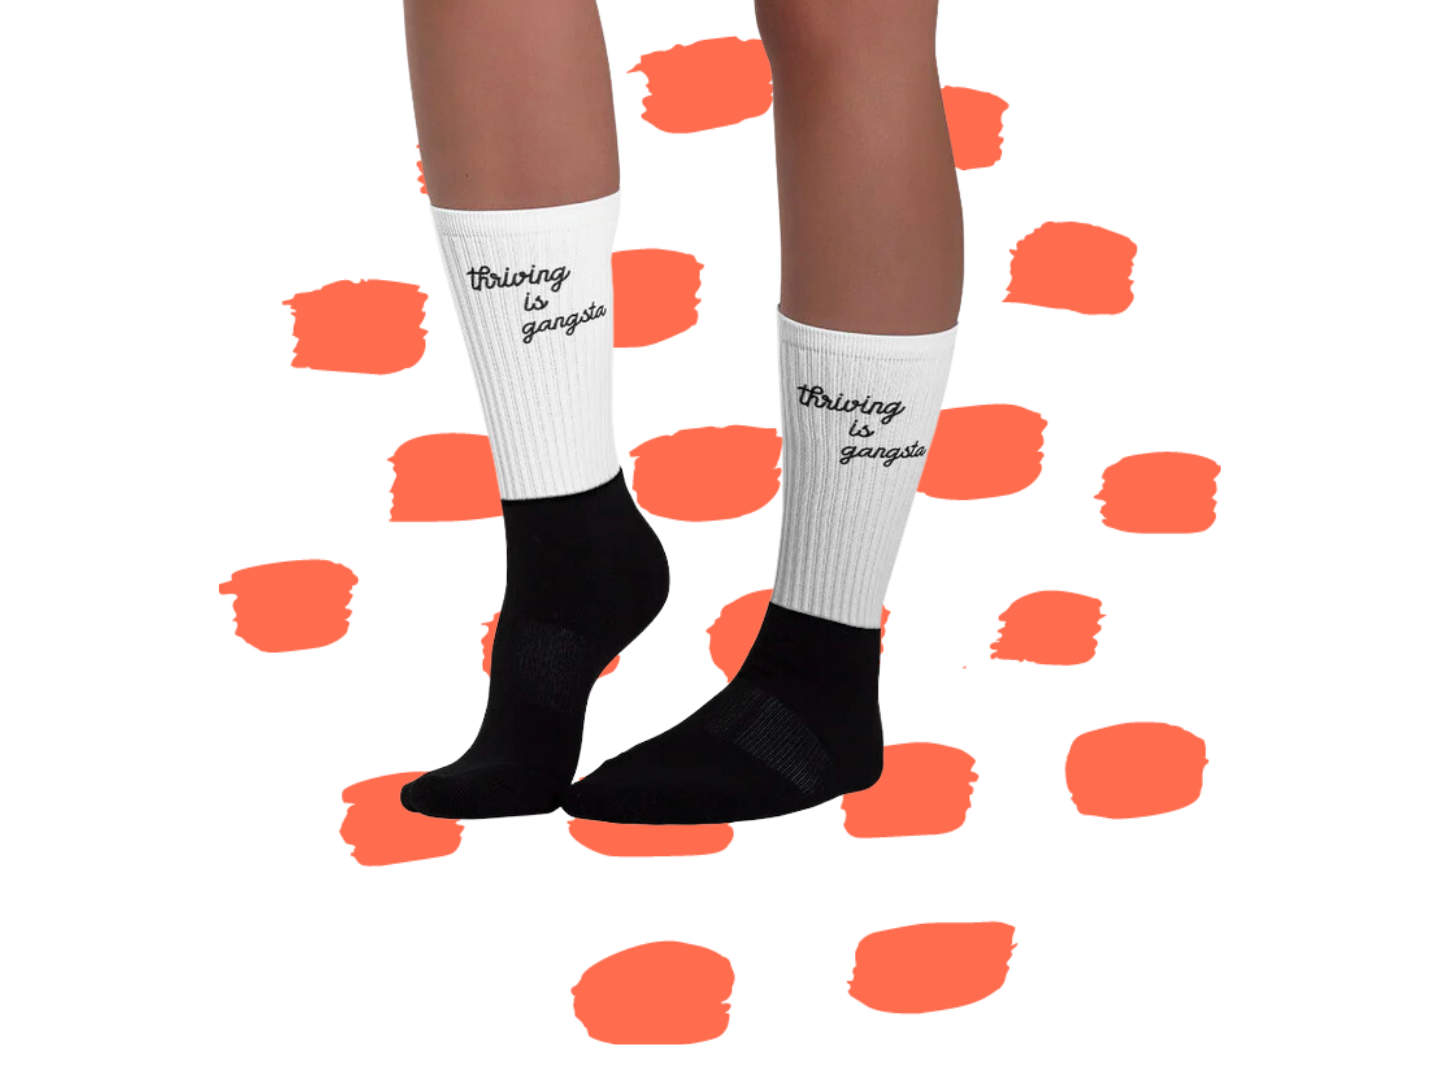 A pair of legs wearing Thrive Gang's "Thriving is Gangsta" black and white socks.